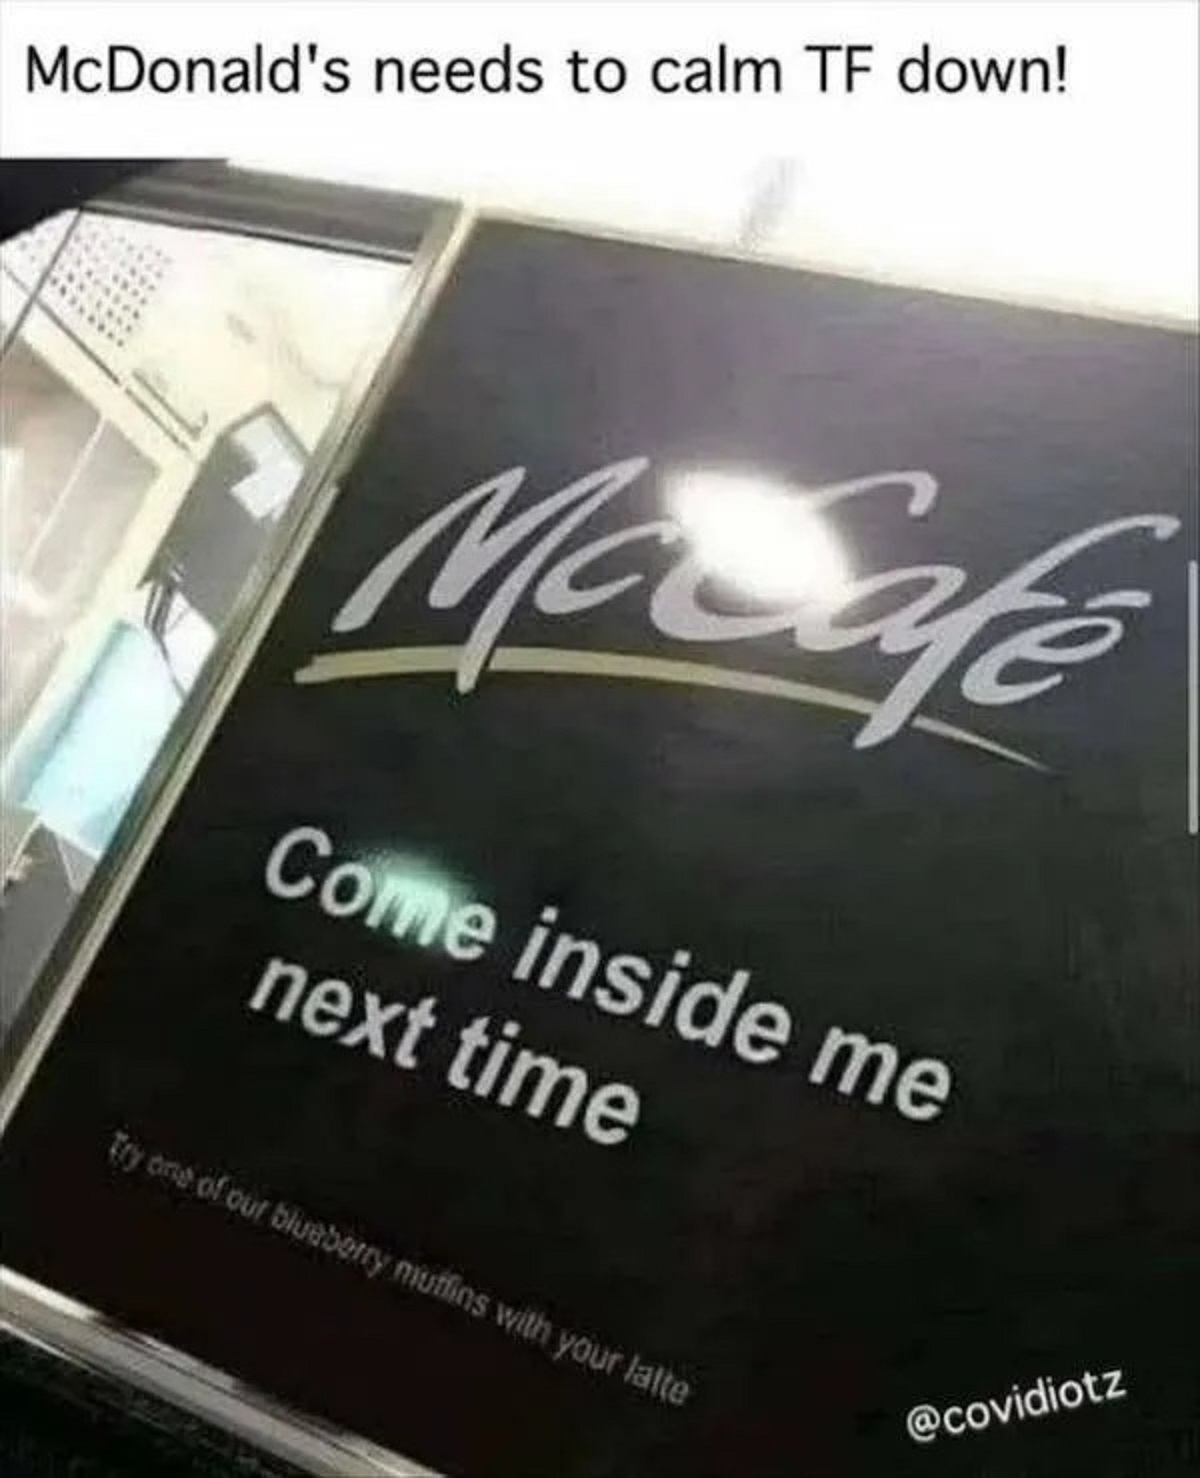 spicy memes - McDonald's needs to calm Tf down! McCafe Come inside me next time Try one of our blueberry muffins with your latte